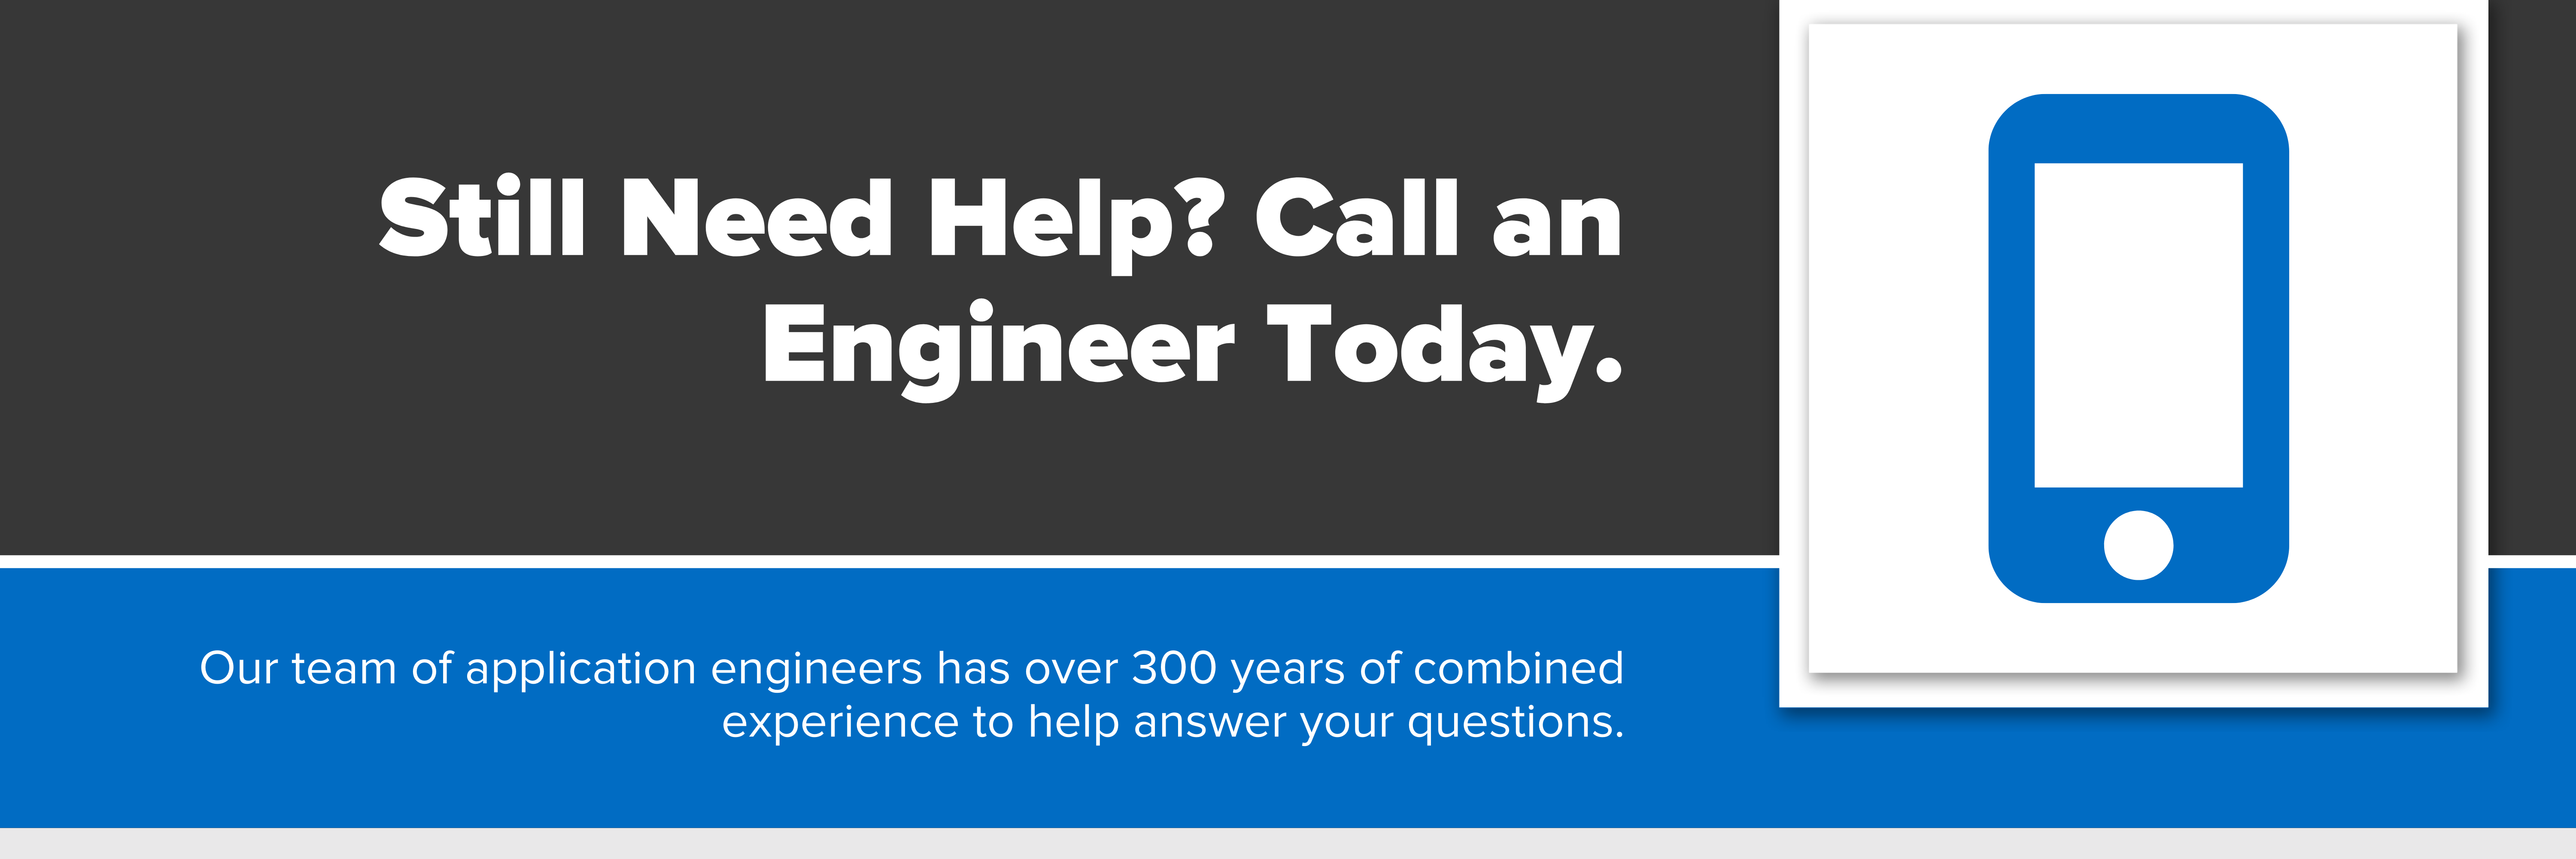 Header image with text "Still Need Help? Call an Engineer Today"